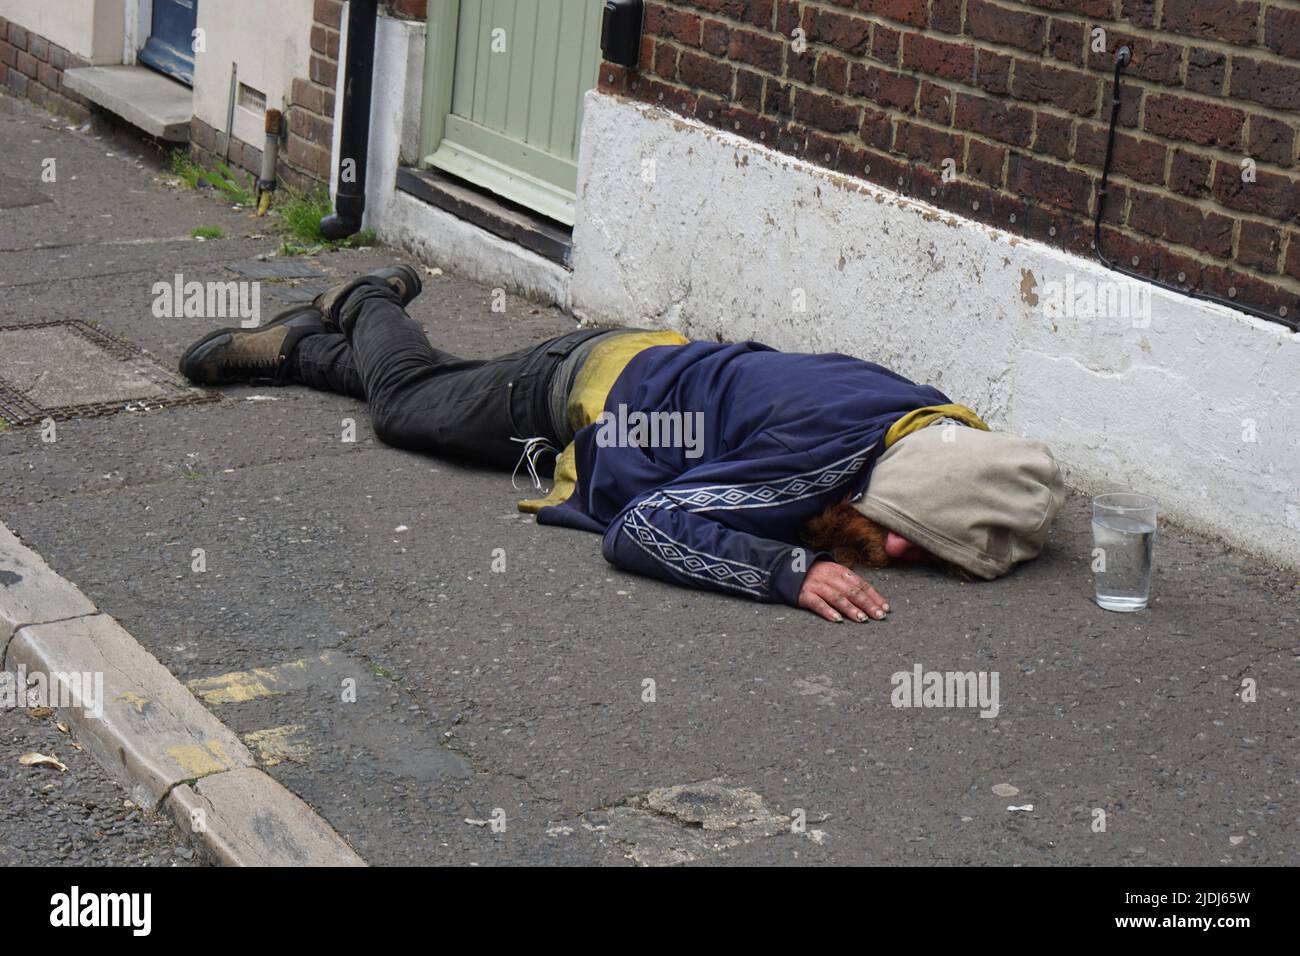 Homeless Drunk Passed Out, Brighton Stock Photo